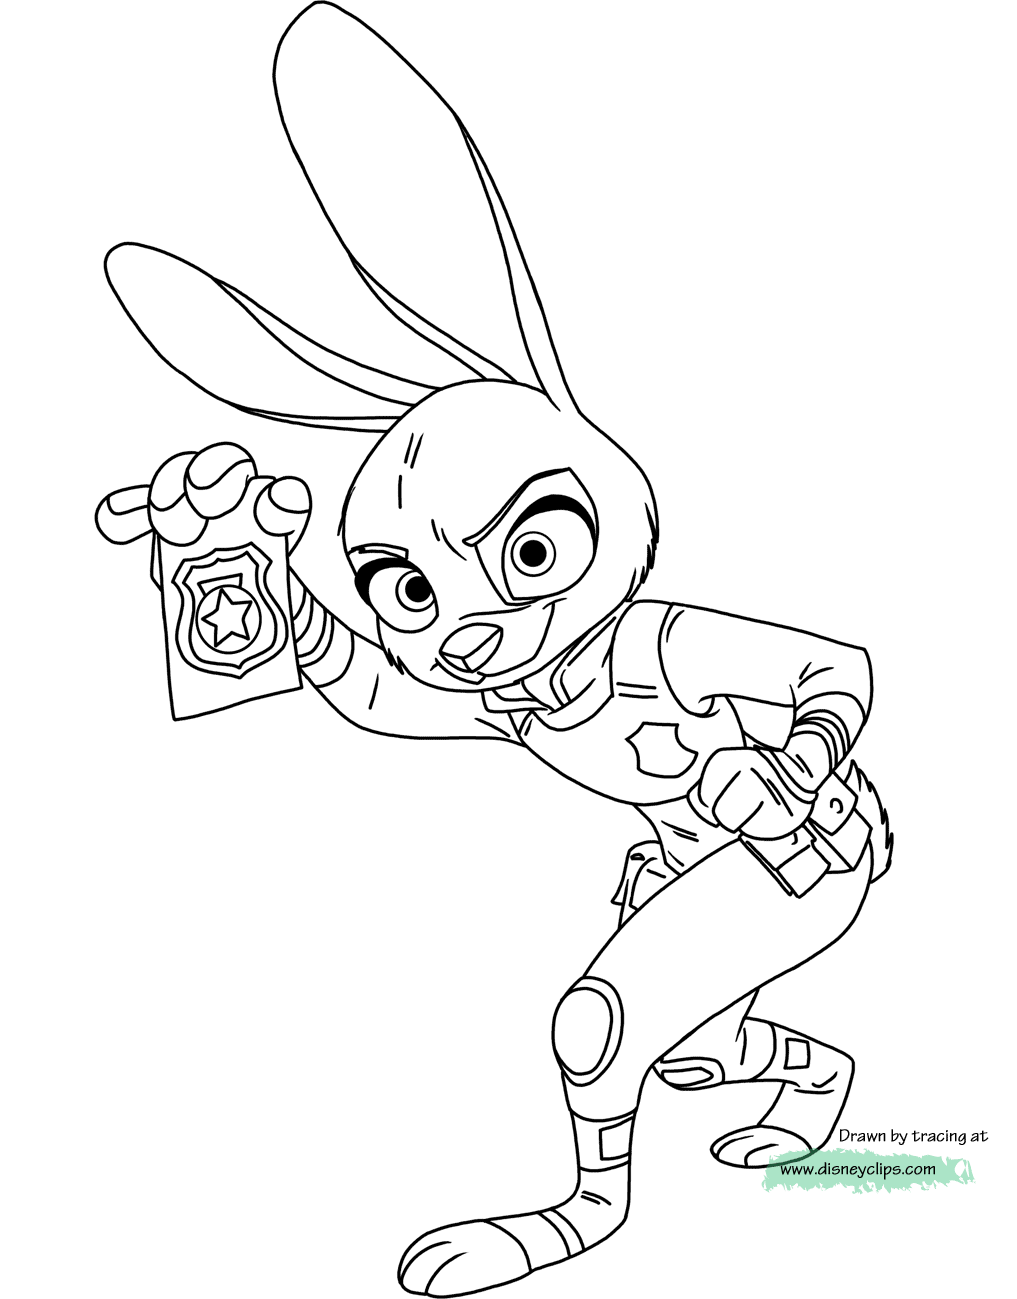 Disneys zootopia coloring pages